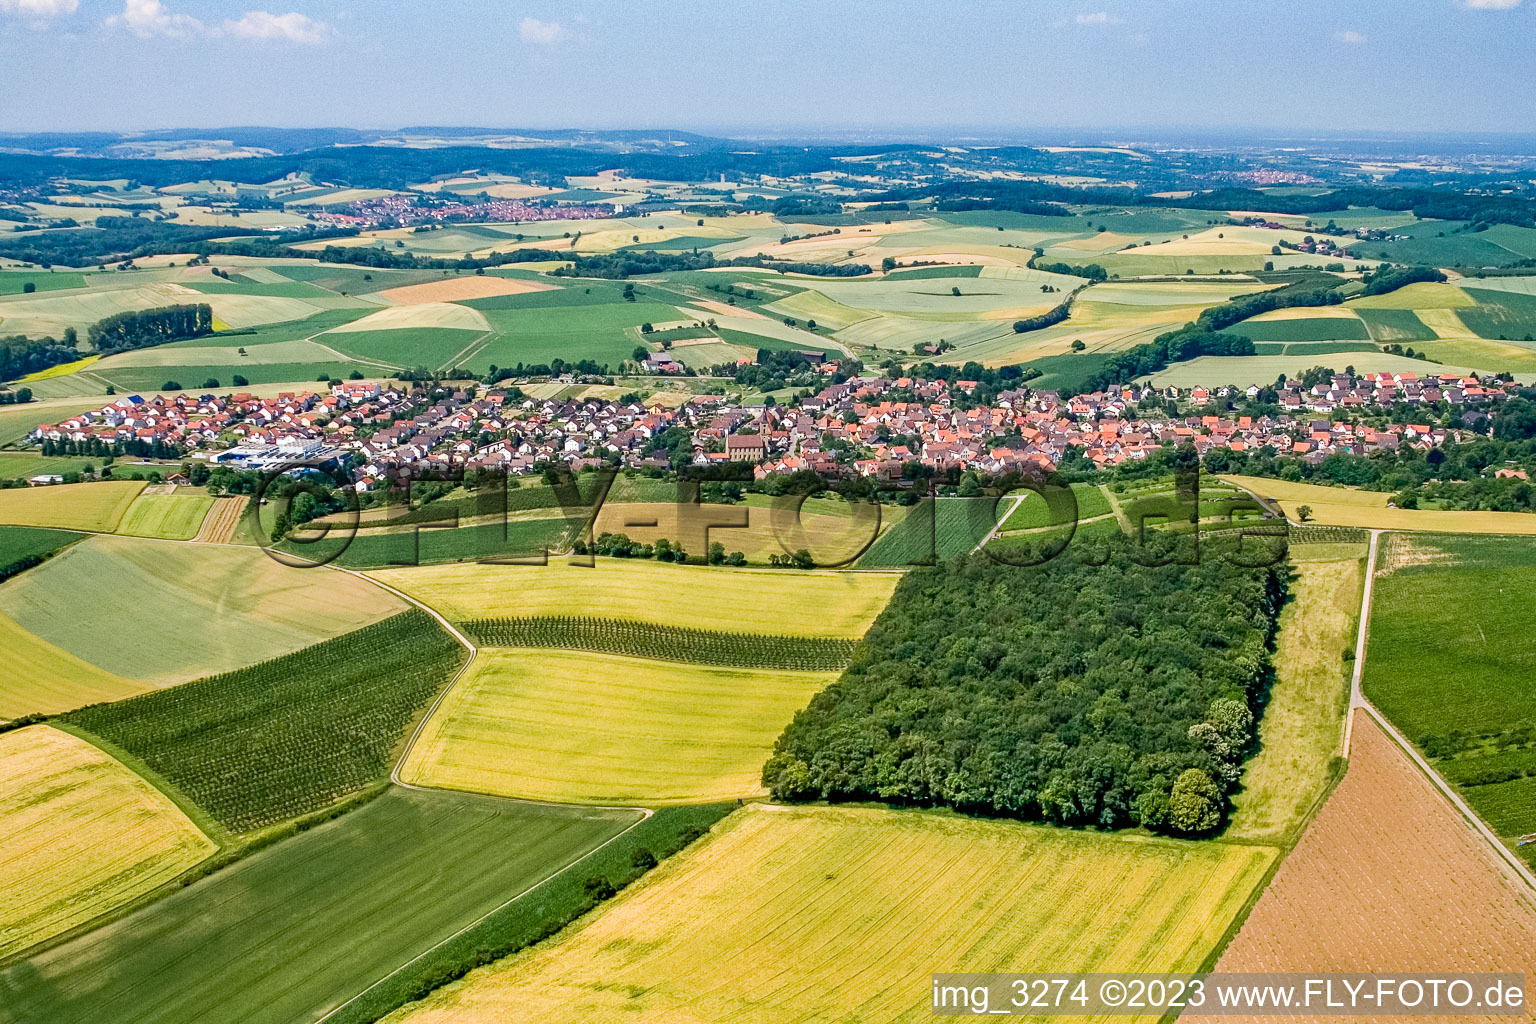 From the east in the district Menzingen in Kraichtal in the state Baden-Wuerttemberg, Germany